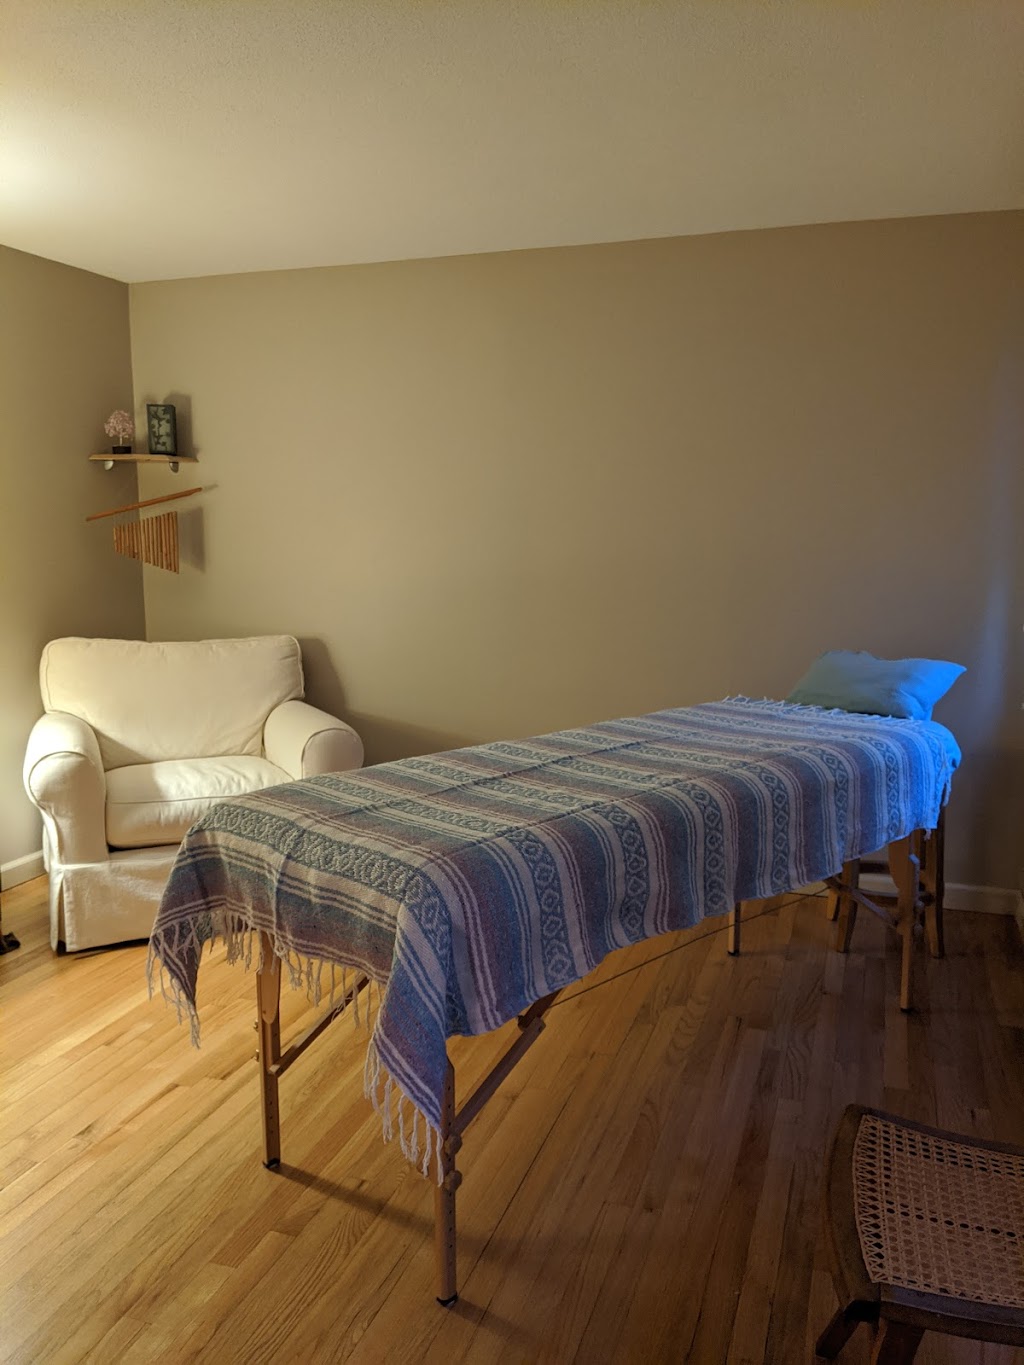 Heart and Healing Touch - Reiki, Thai and Baby Massage | 15 Darby Dr, Westfield, MA 01085 | Phone: (413) 530-9806